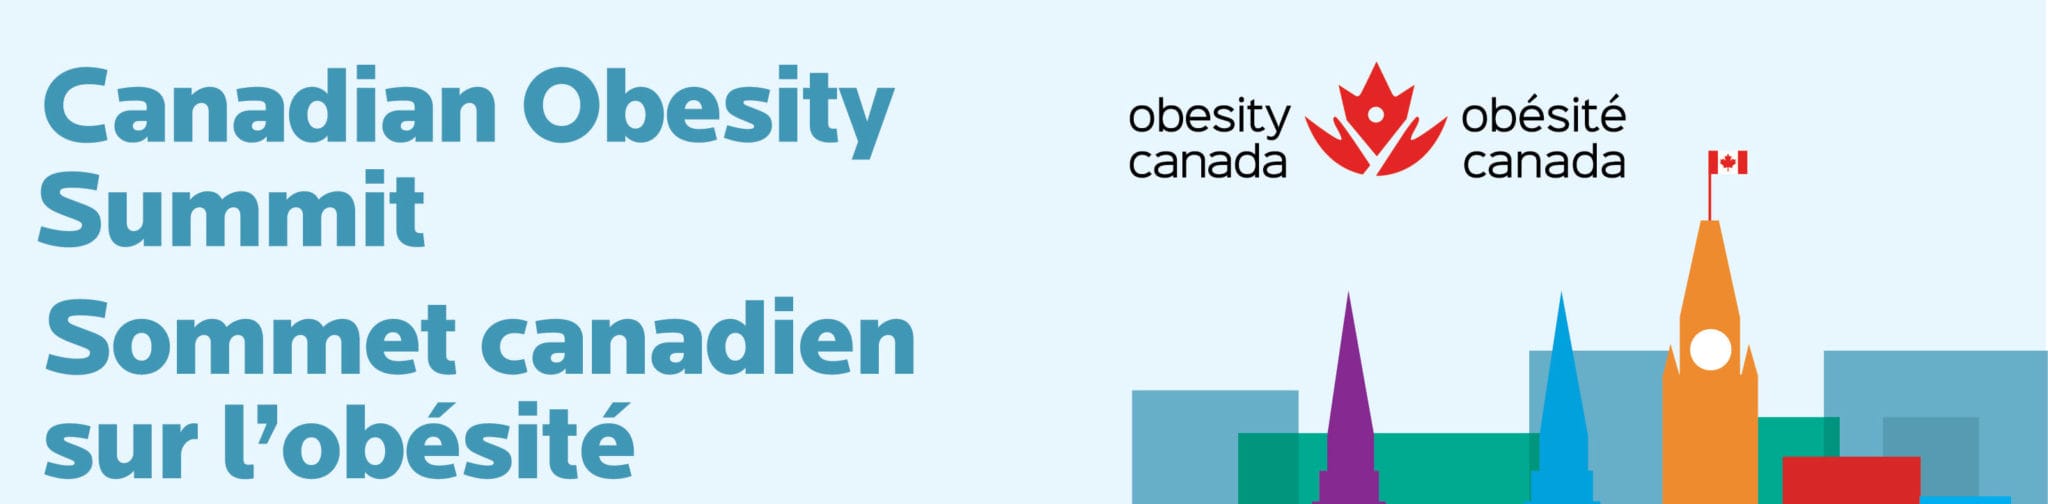 Banner for the canadian obesity summit featuring the event's logo with english and french titles, and a colorful skyline graphic.